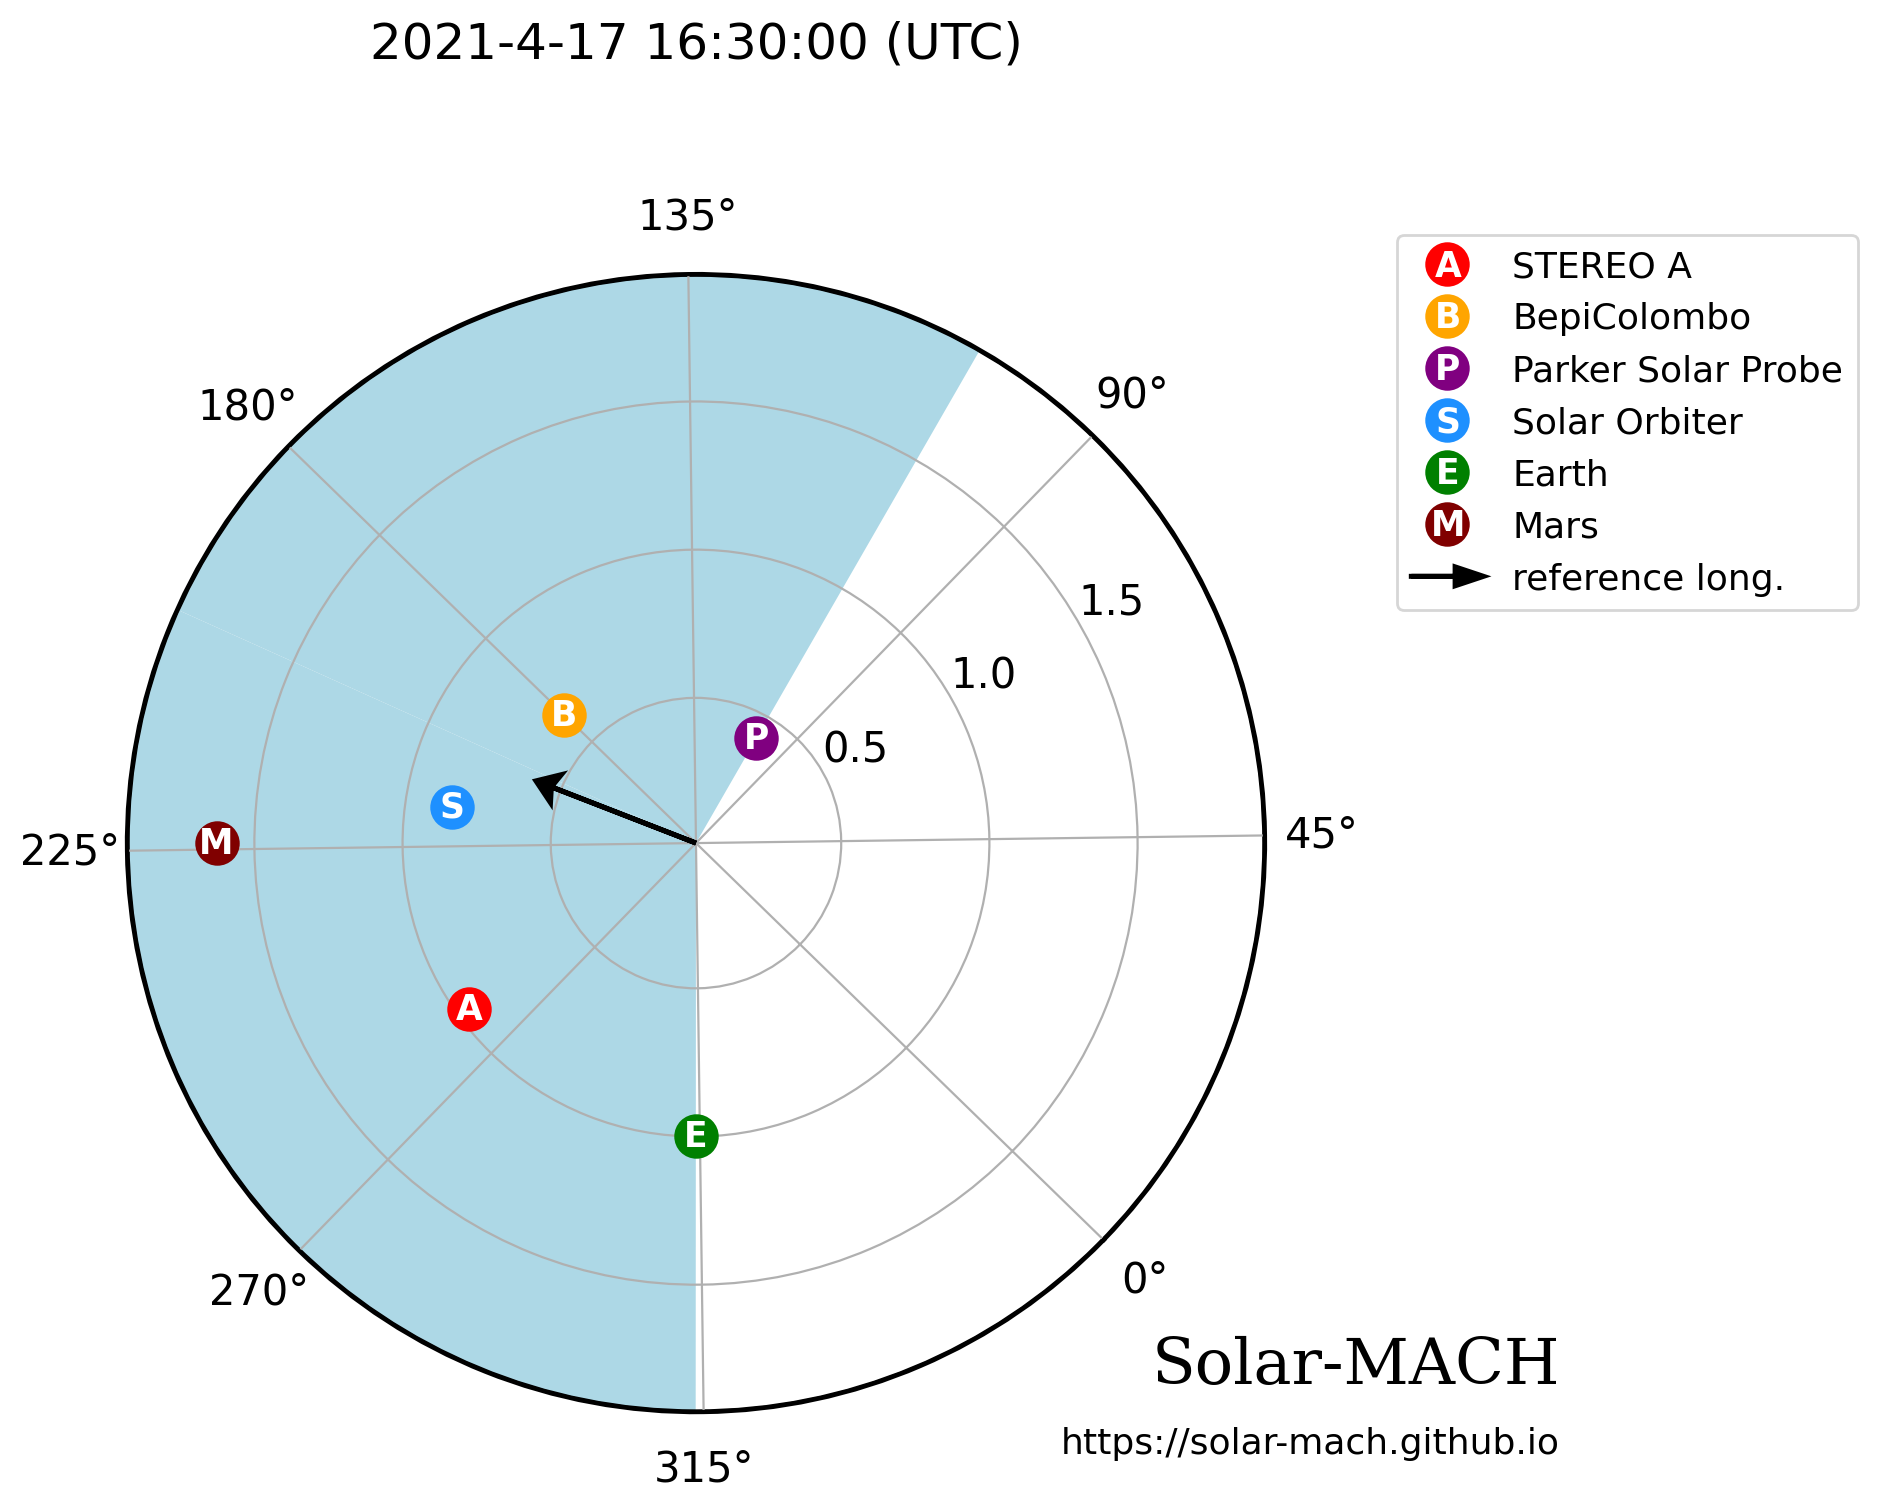 A diagram shows a circle representing the solar system with the Sun (not shown) in the center of the circle and gray lines radiating from the center to the edge of the circle. Degree labels, from 0 degrees to 315 degrees, appear at the end of the lines just outside the circle. The circle is shaded in blue from roughly 95 degrees to 315 degrees. In various places throughout the shaded area are dots representing STEREO A, BepiColombo, Parker Solar Probe, Solar Orbiter, Earth, and Mars. A short black arrow extends from the center of the circle toward the upper left, between BepiColombo and Solar Orbiter. At the top the text 